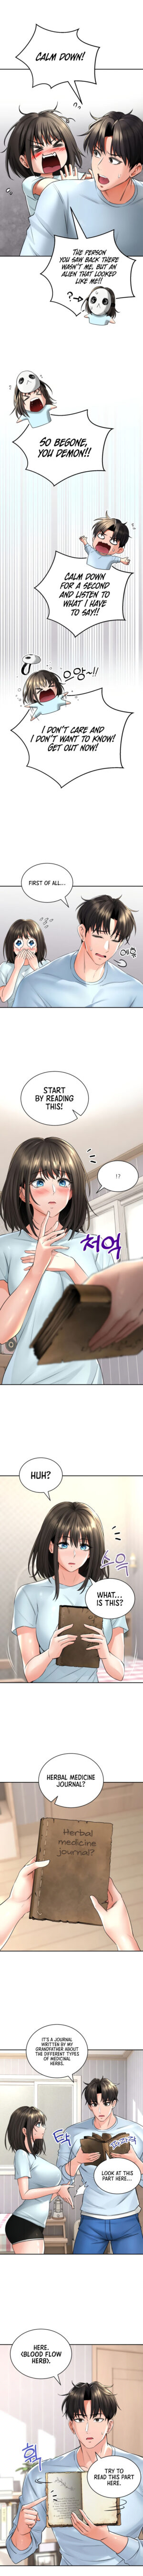 [Lee Juwon] Herbal Love Story (1-19.5) [English] [Omega Scans] [Ongoing]